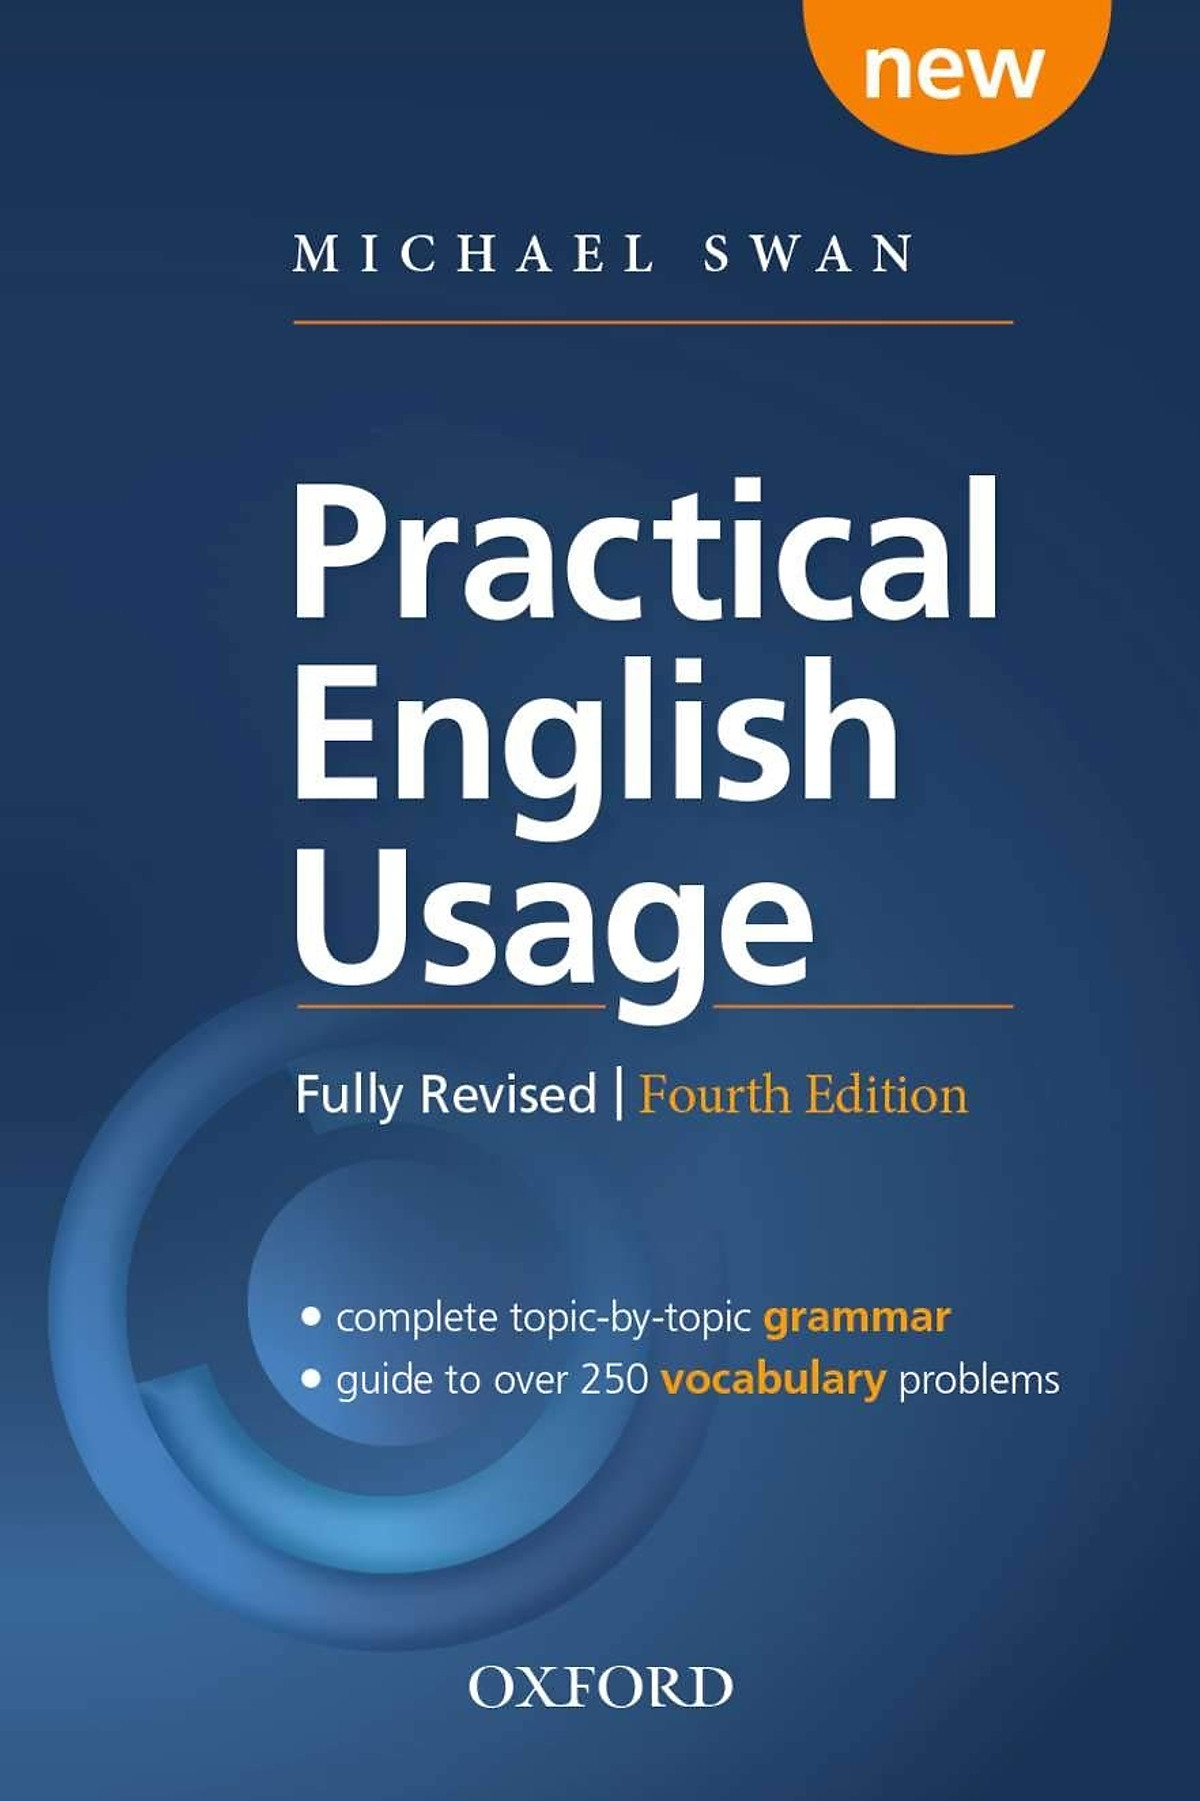 Practical English Usage: Michael Swan's Guide to Problems in English 